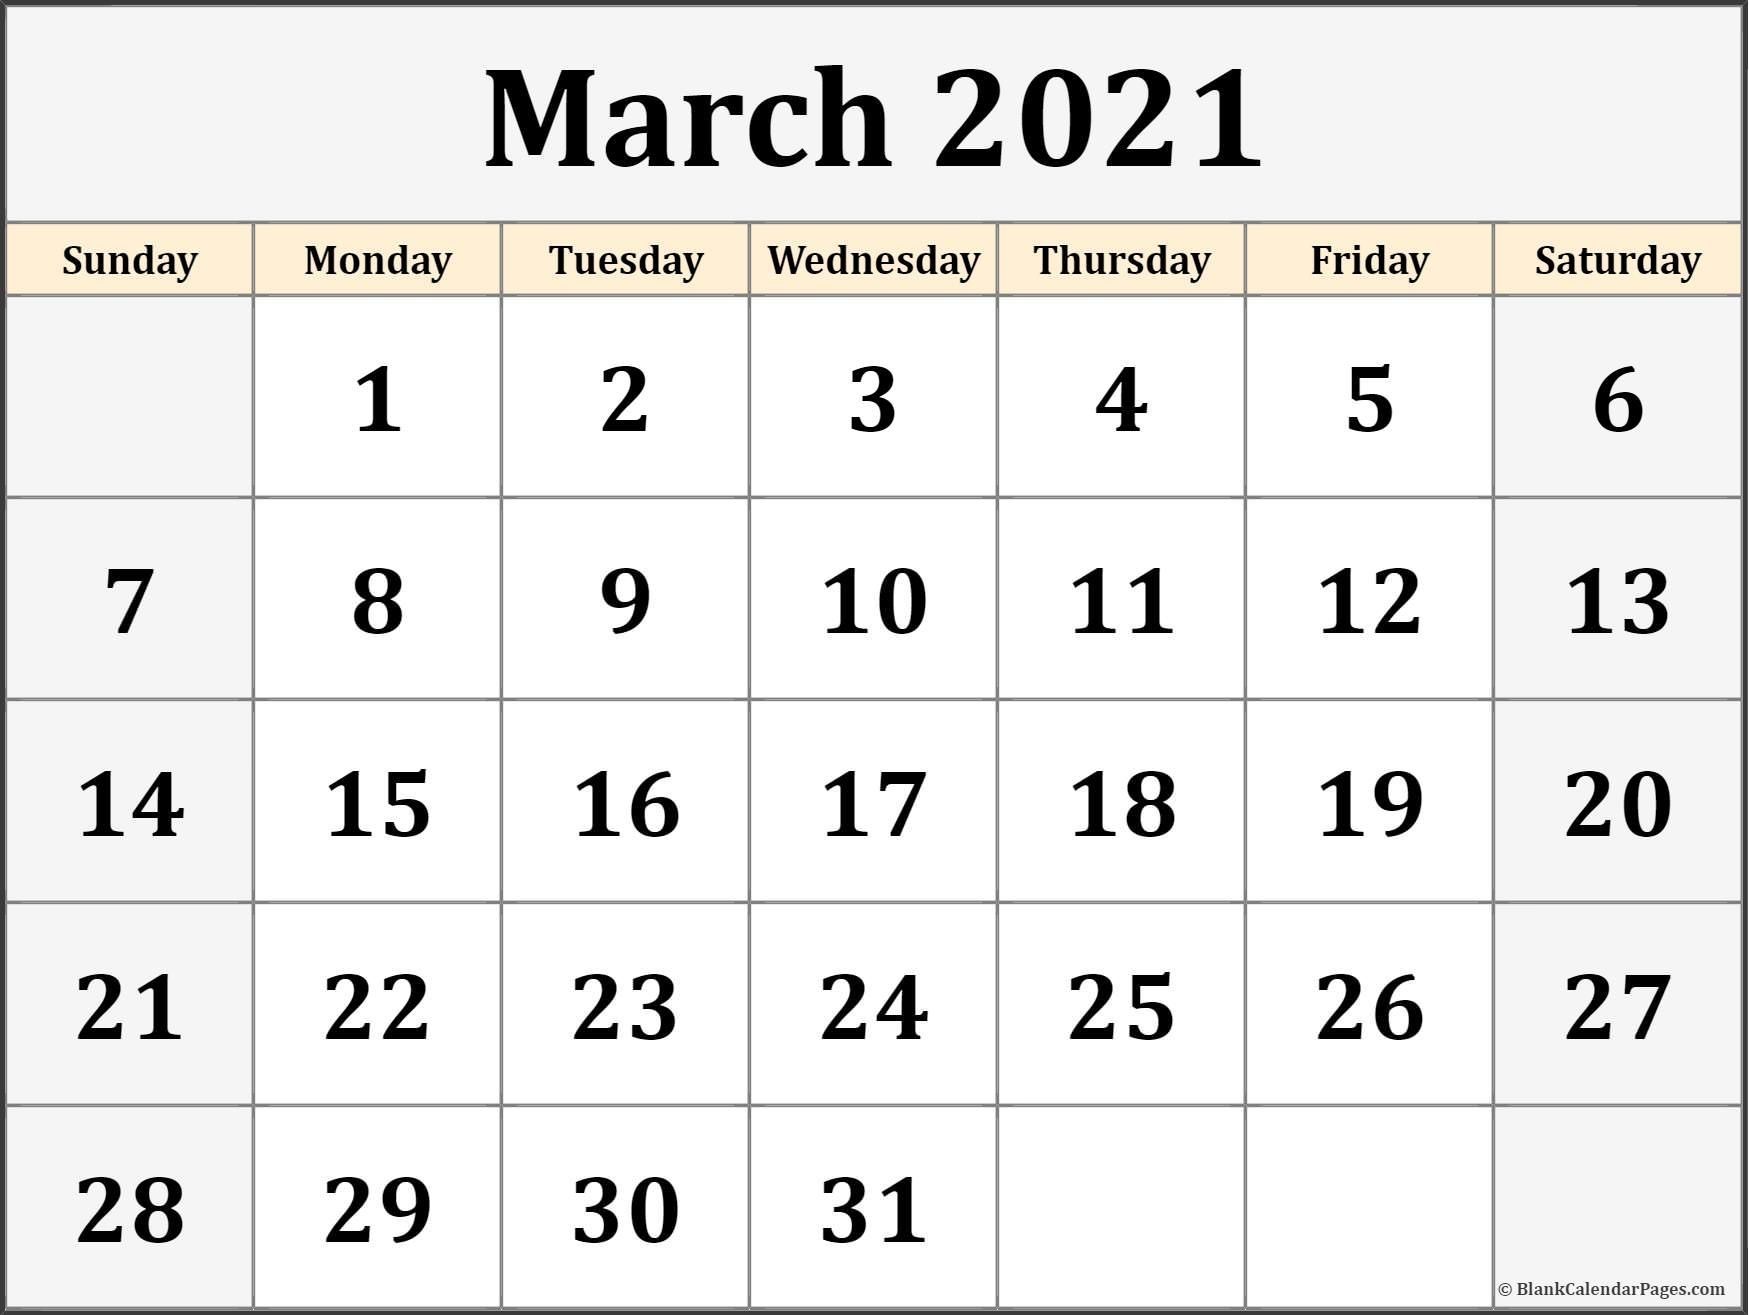 March 2021 Calendar | Free Printable Monthly Calendars